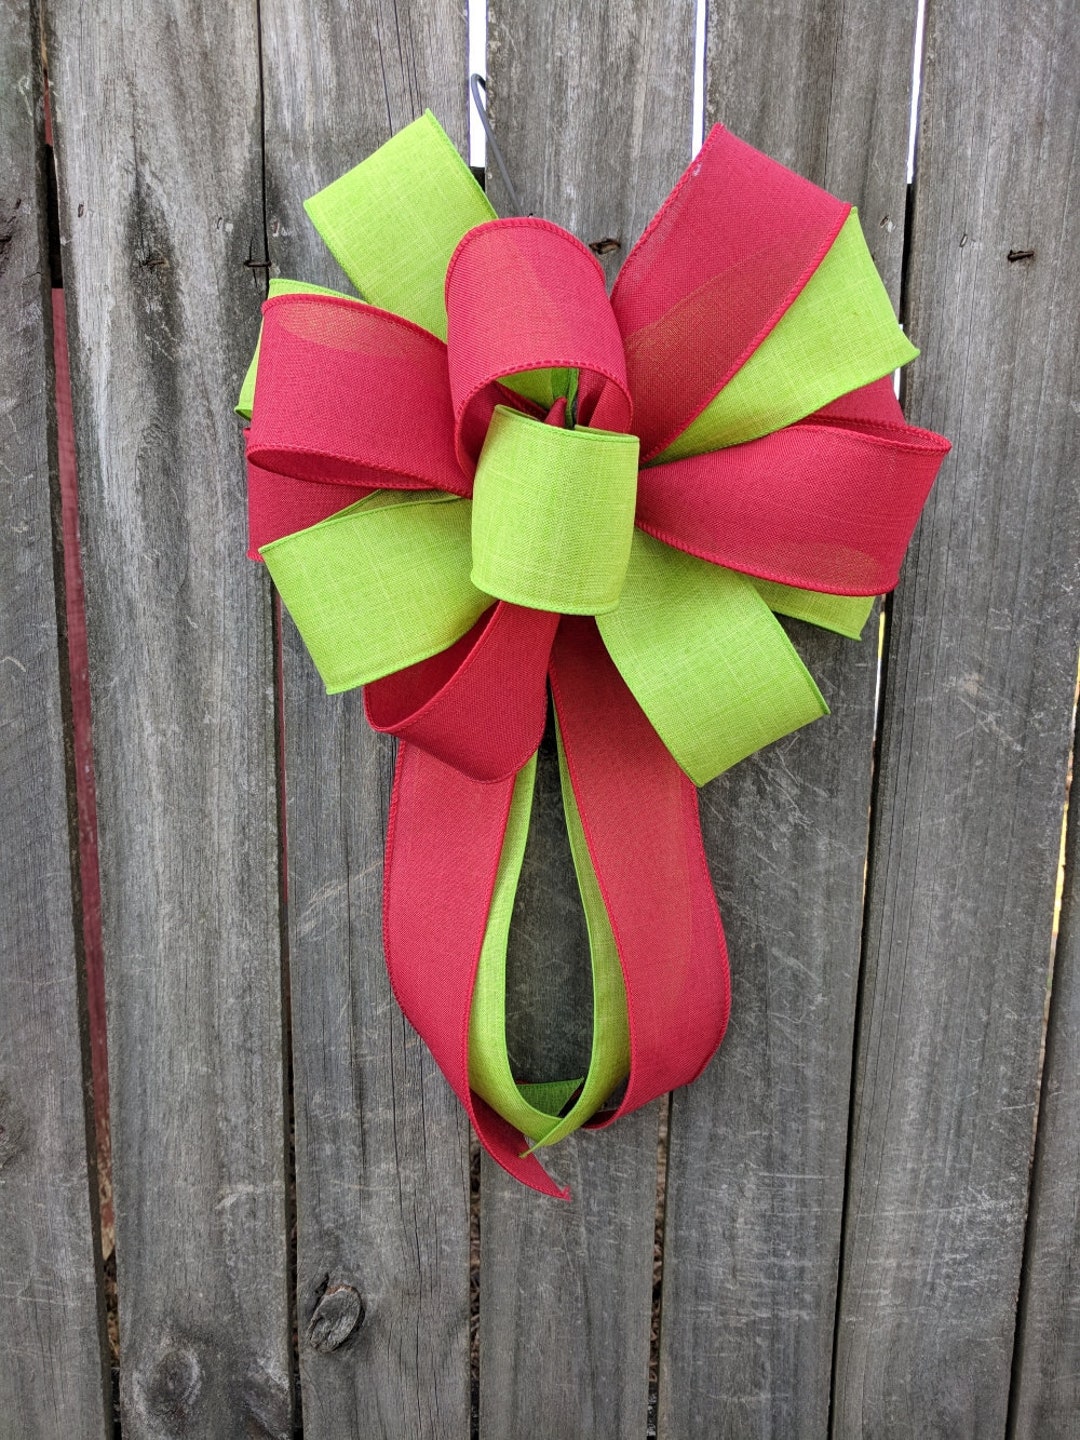 1.5” Red and Green Grosgrain Christmas Ribbon for Bows, Wreaths